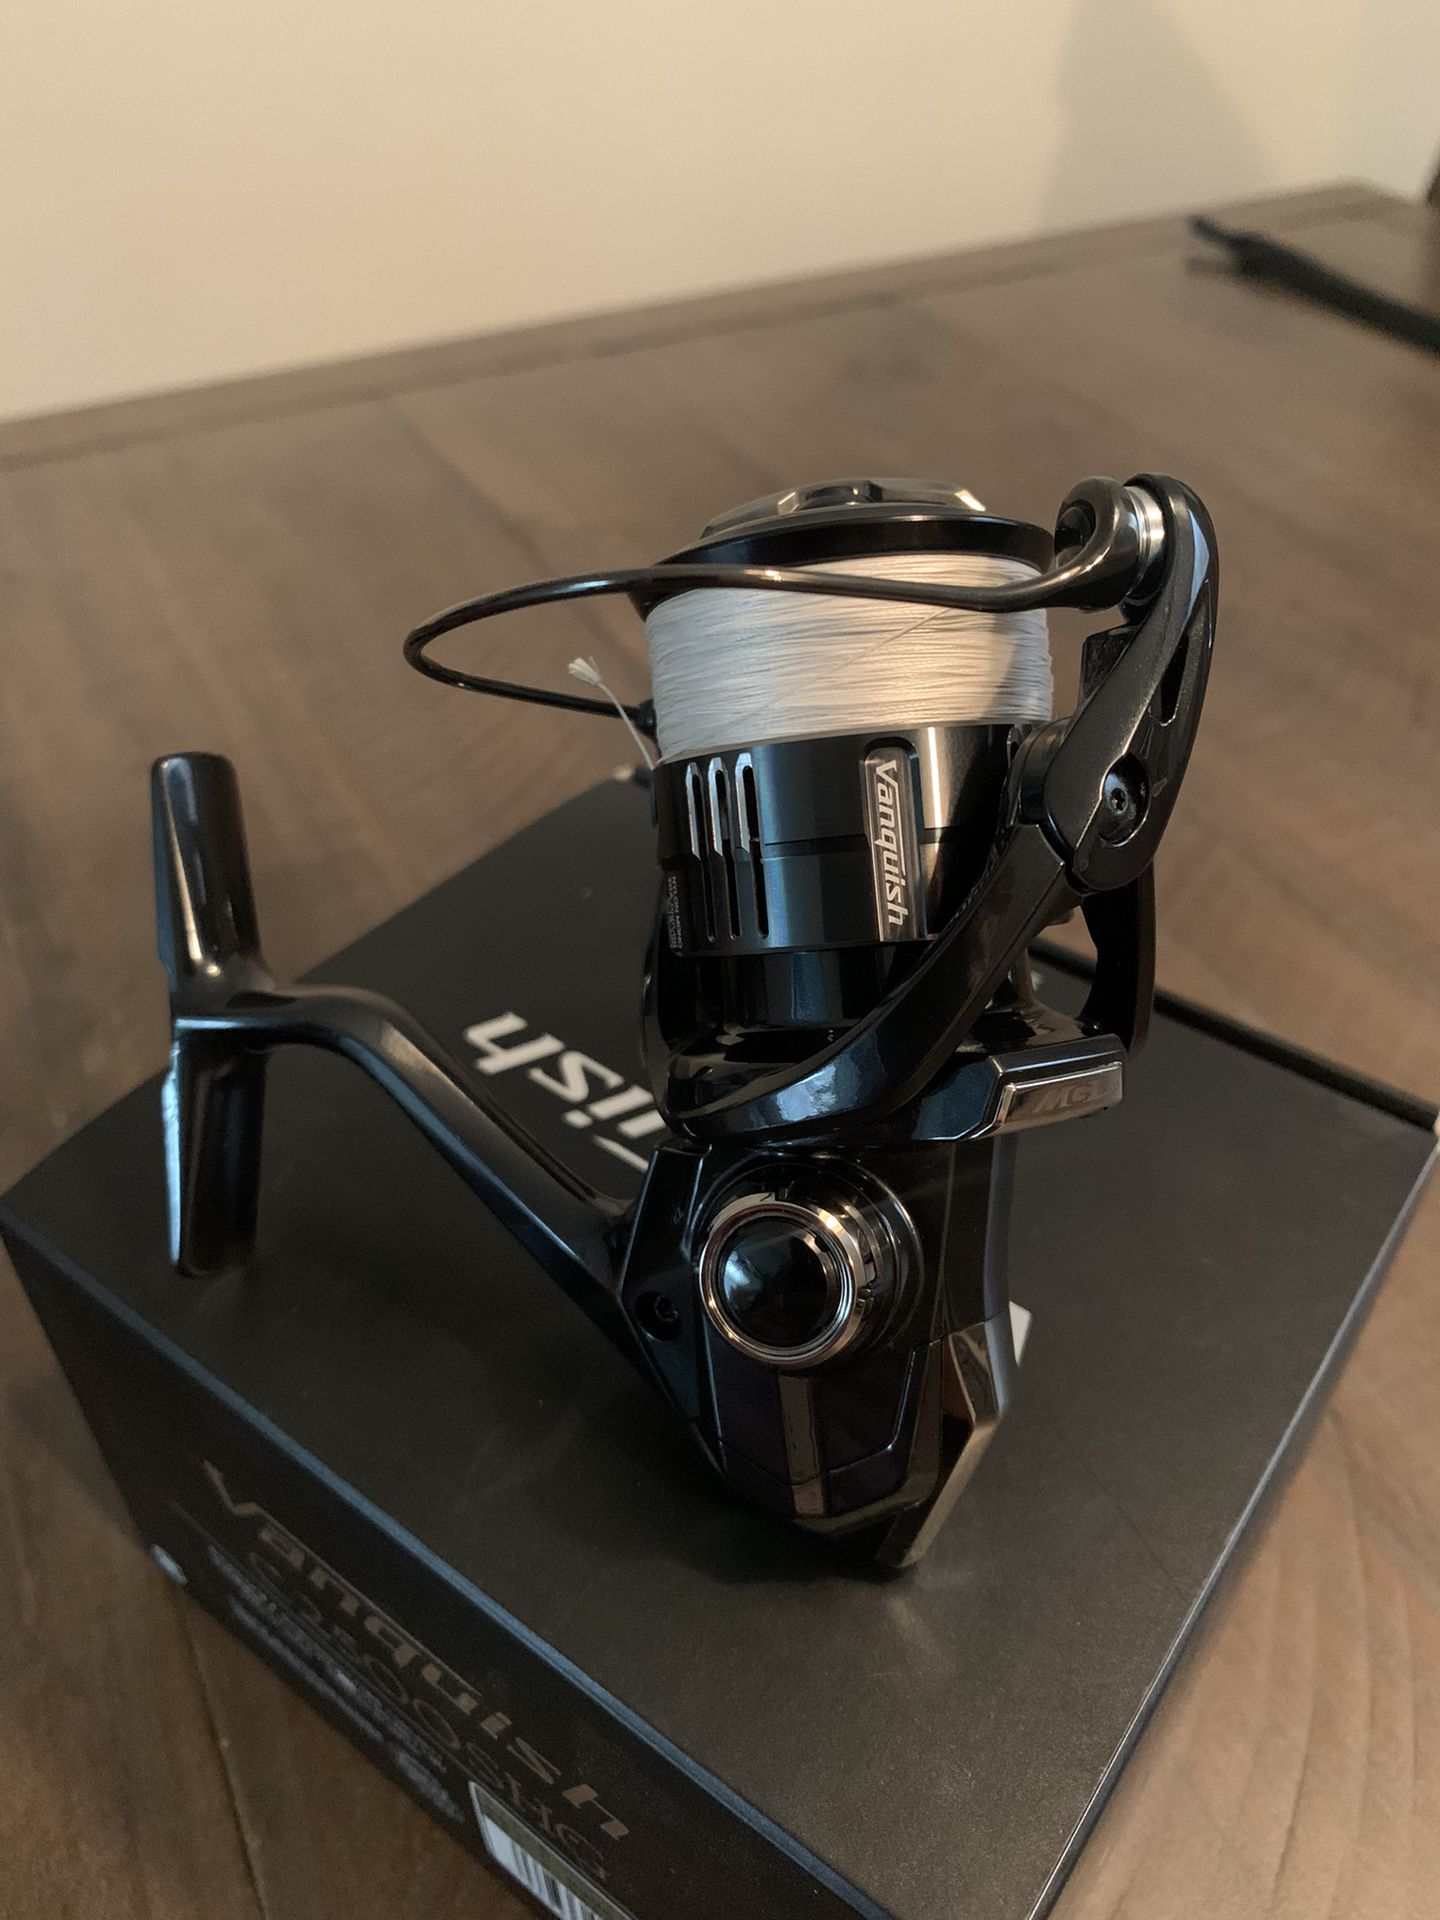 Shimano Scorpion DC for Sale in Fowler, CA - OfferUp